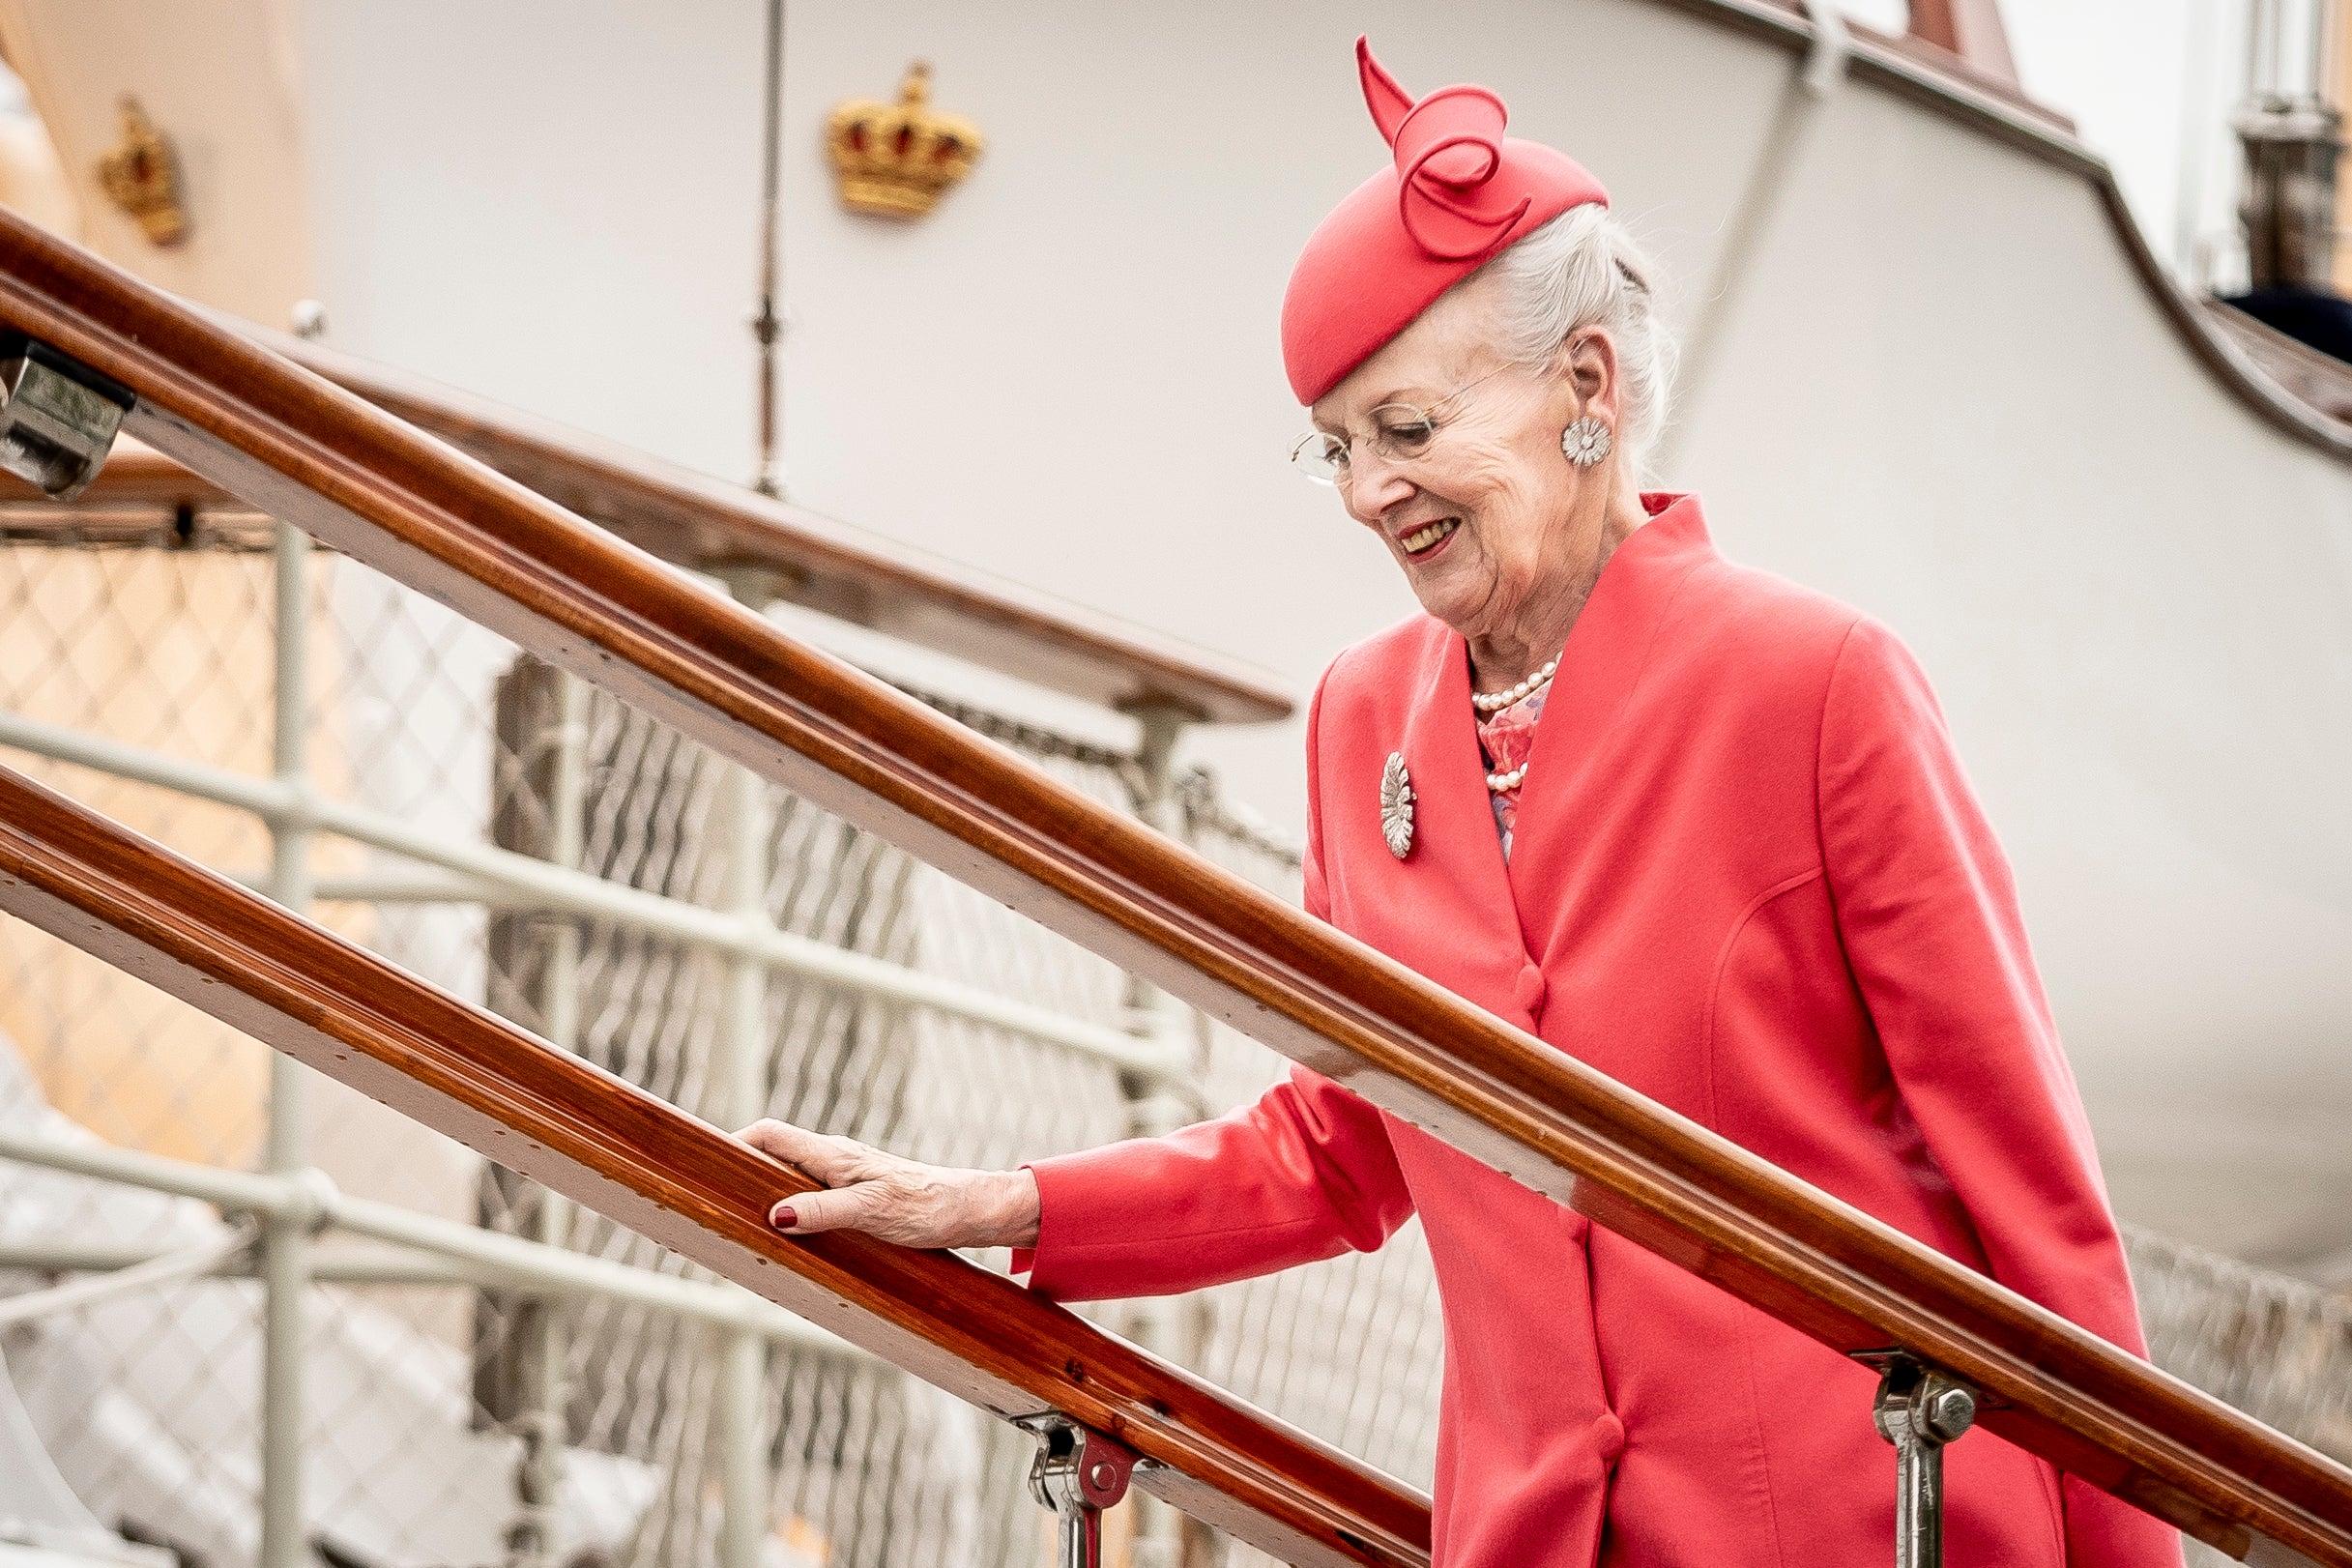 Queen Margrethe II of Denmark Who is the worlds last remaining queen regnant? The Independent